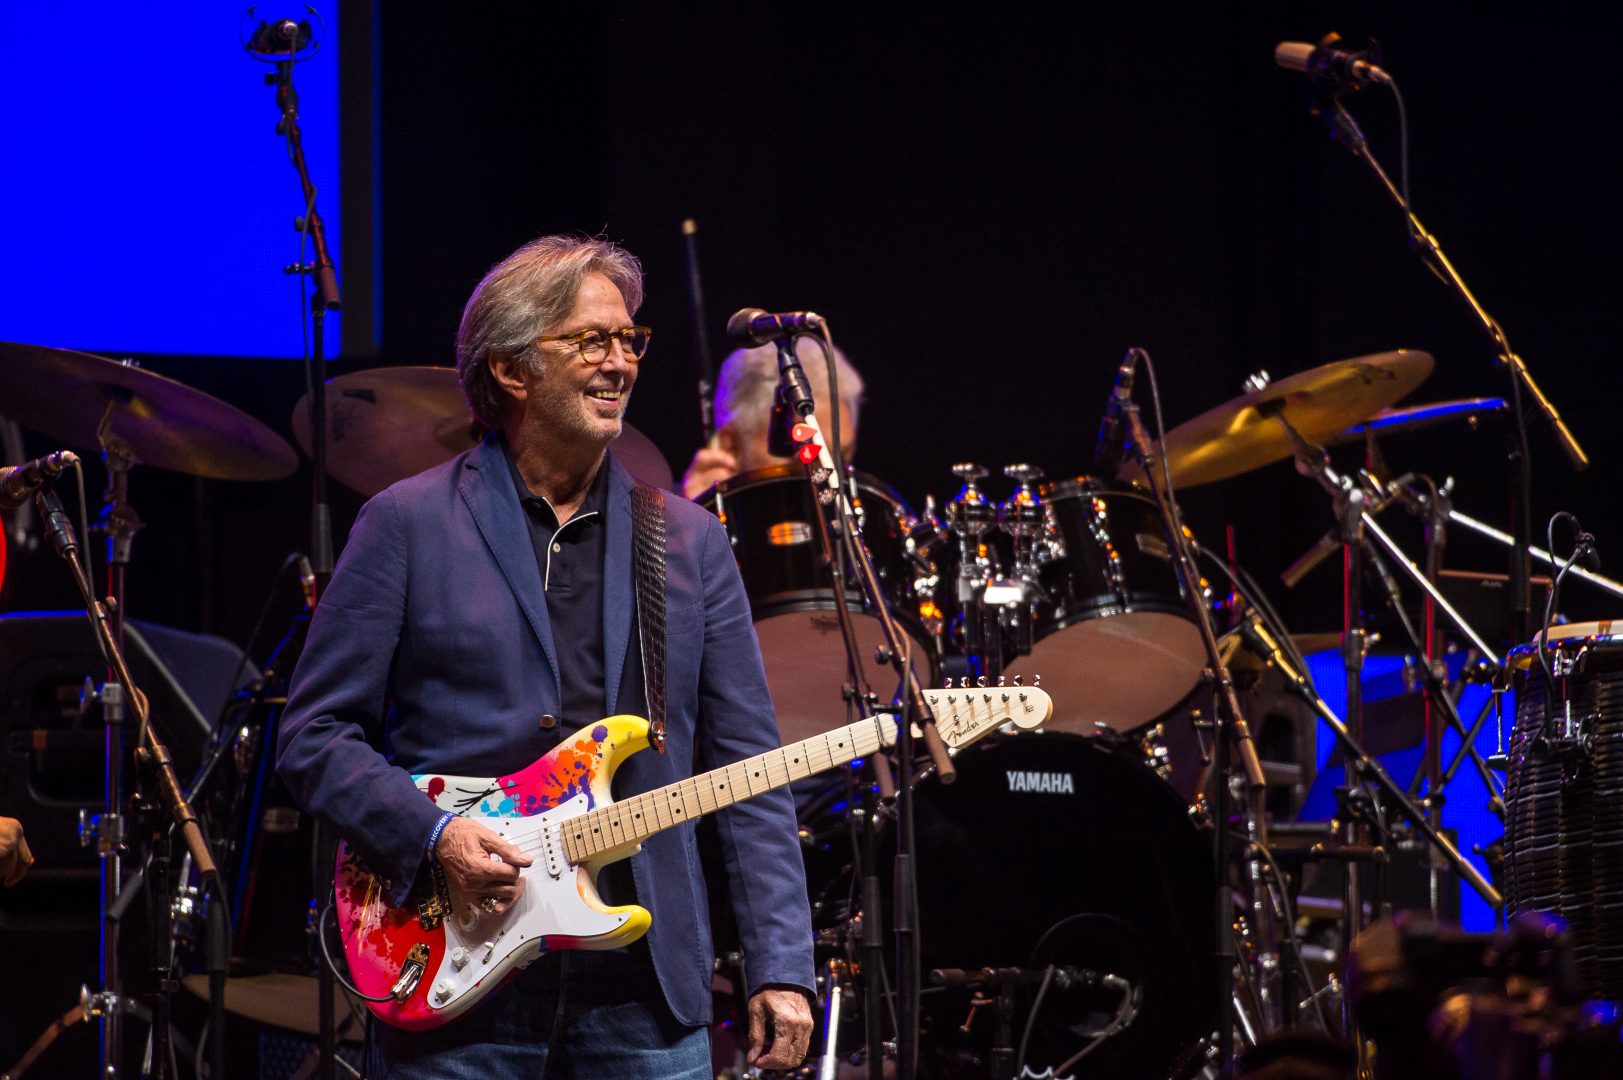 Eric Clapton's Crossroads Guitar Festival on Friday, September 20, 2019 at the American Airlines Center in Dallas, Texas.